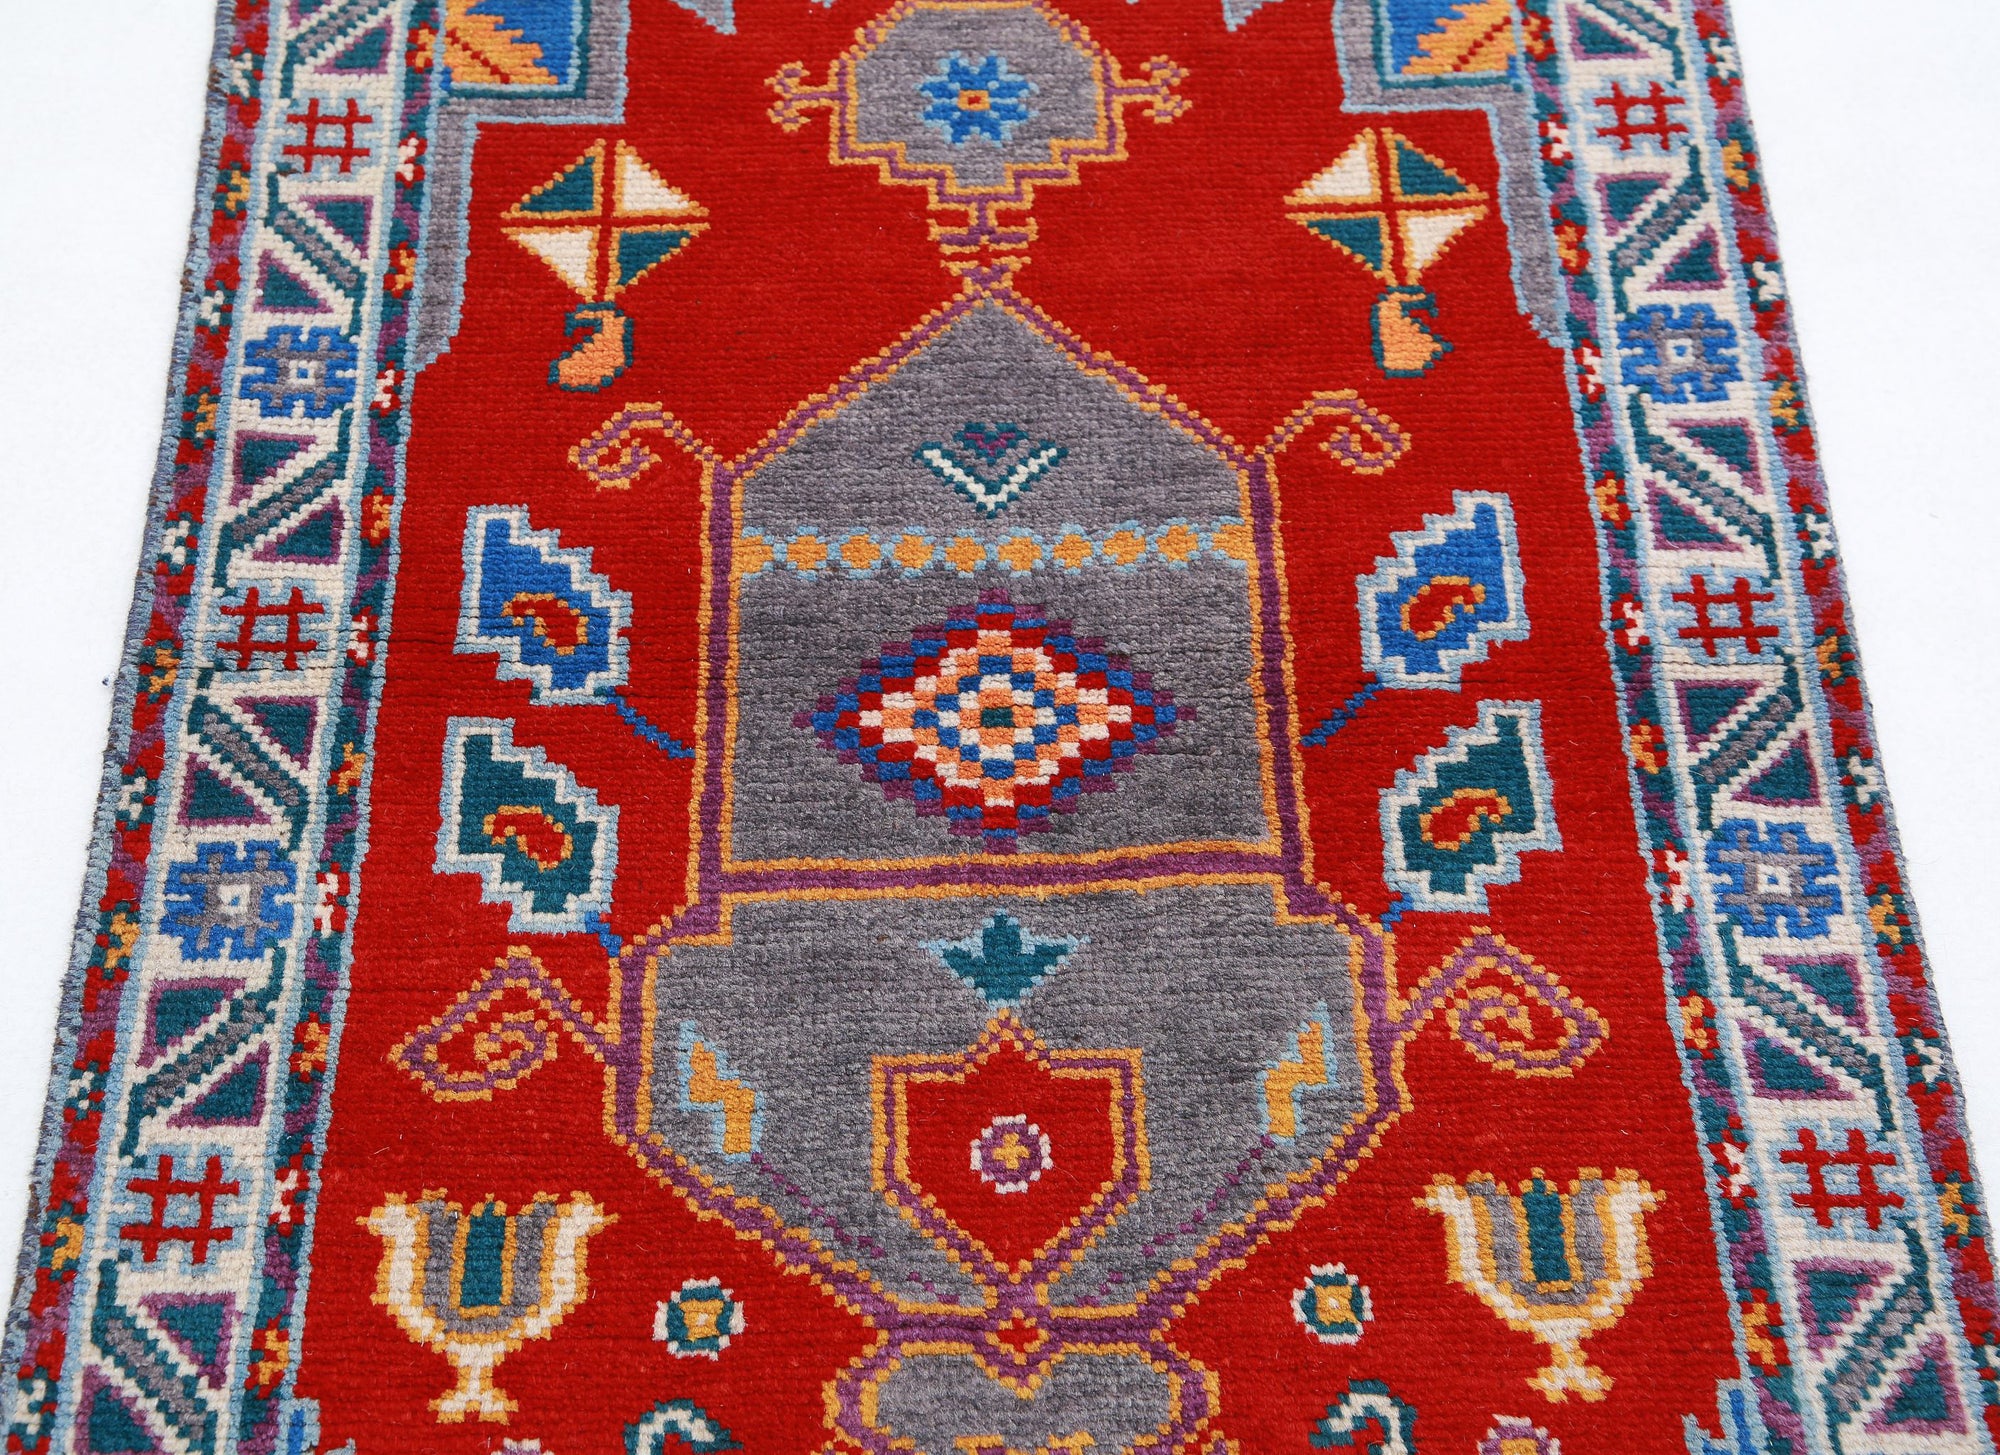 Revival-hand-knotted-qarghani-wool-rug-5014014-4.jpg